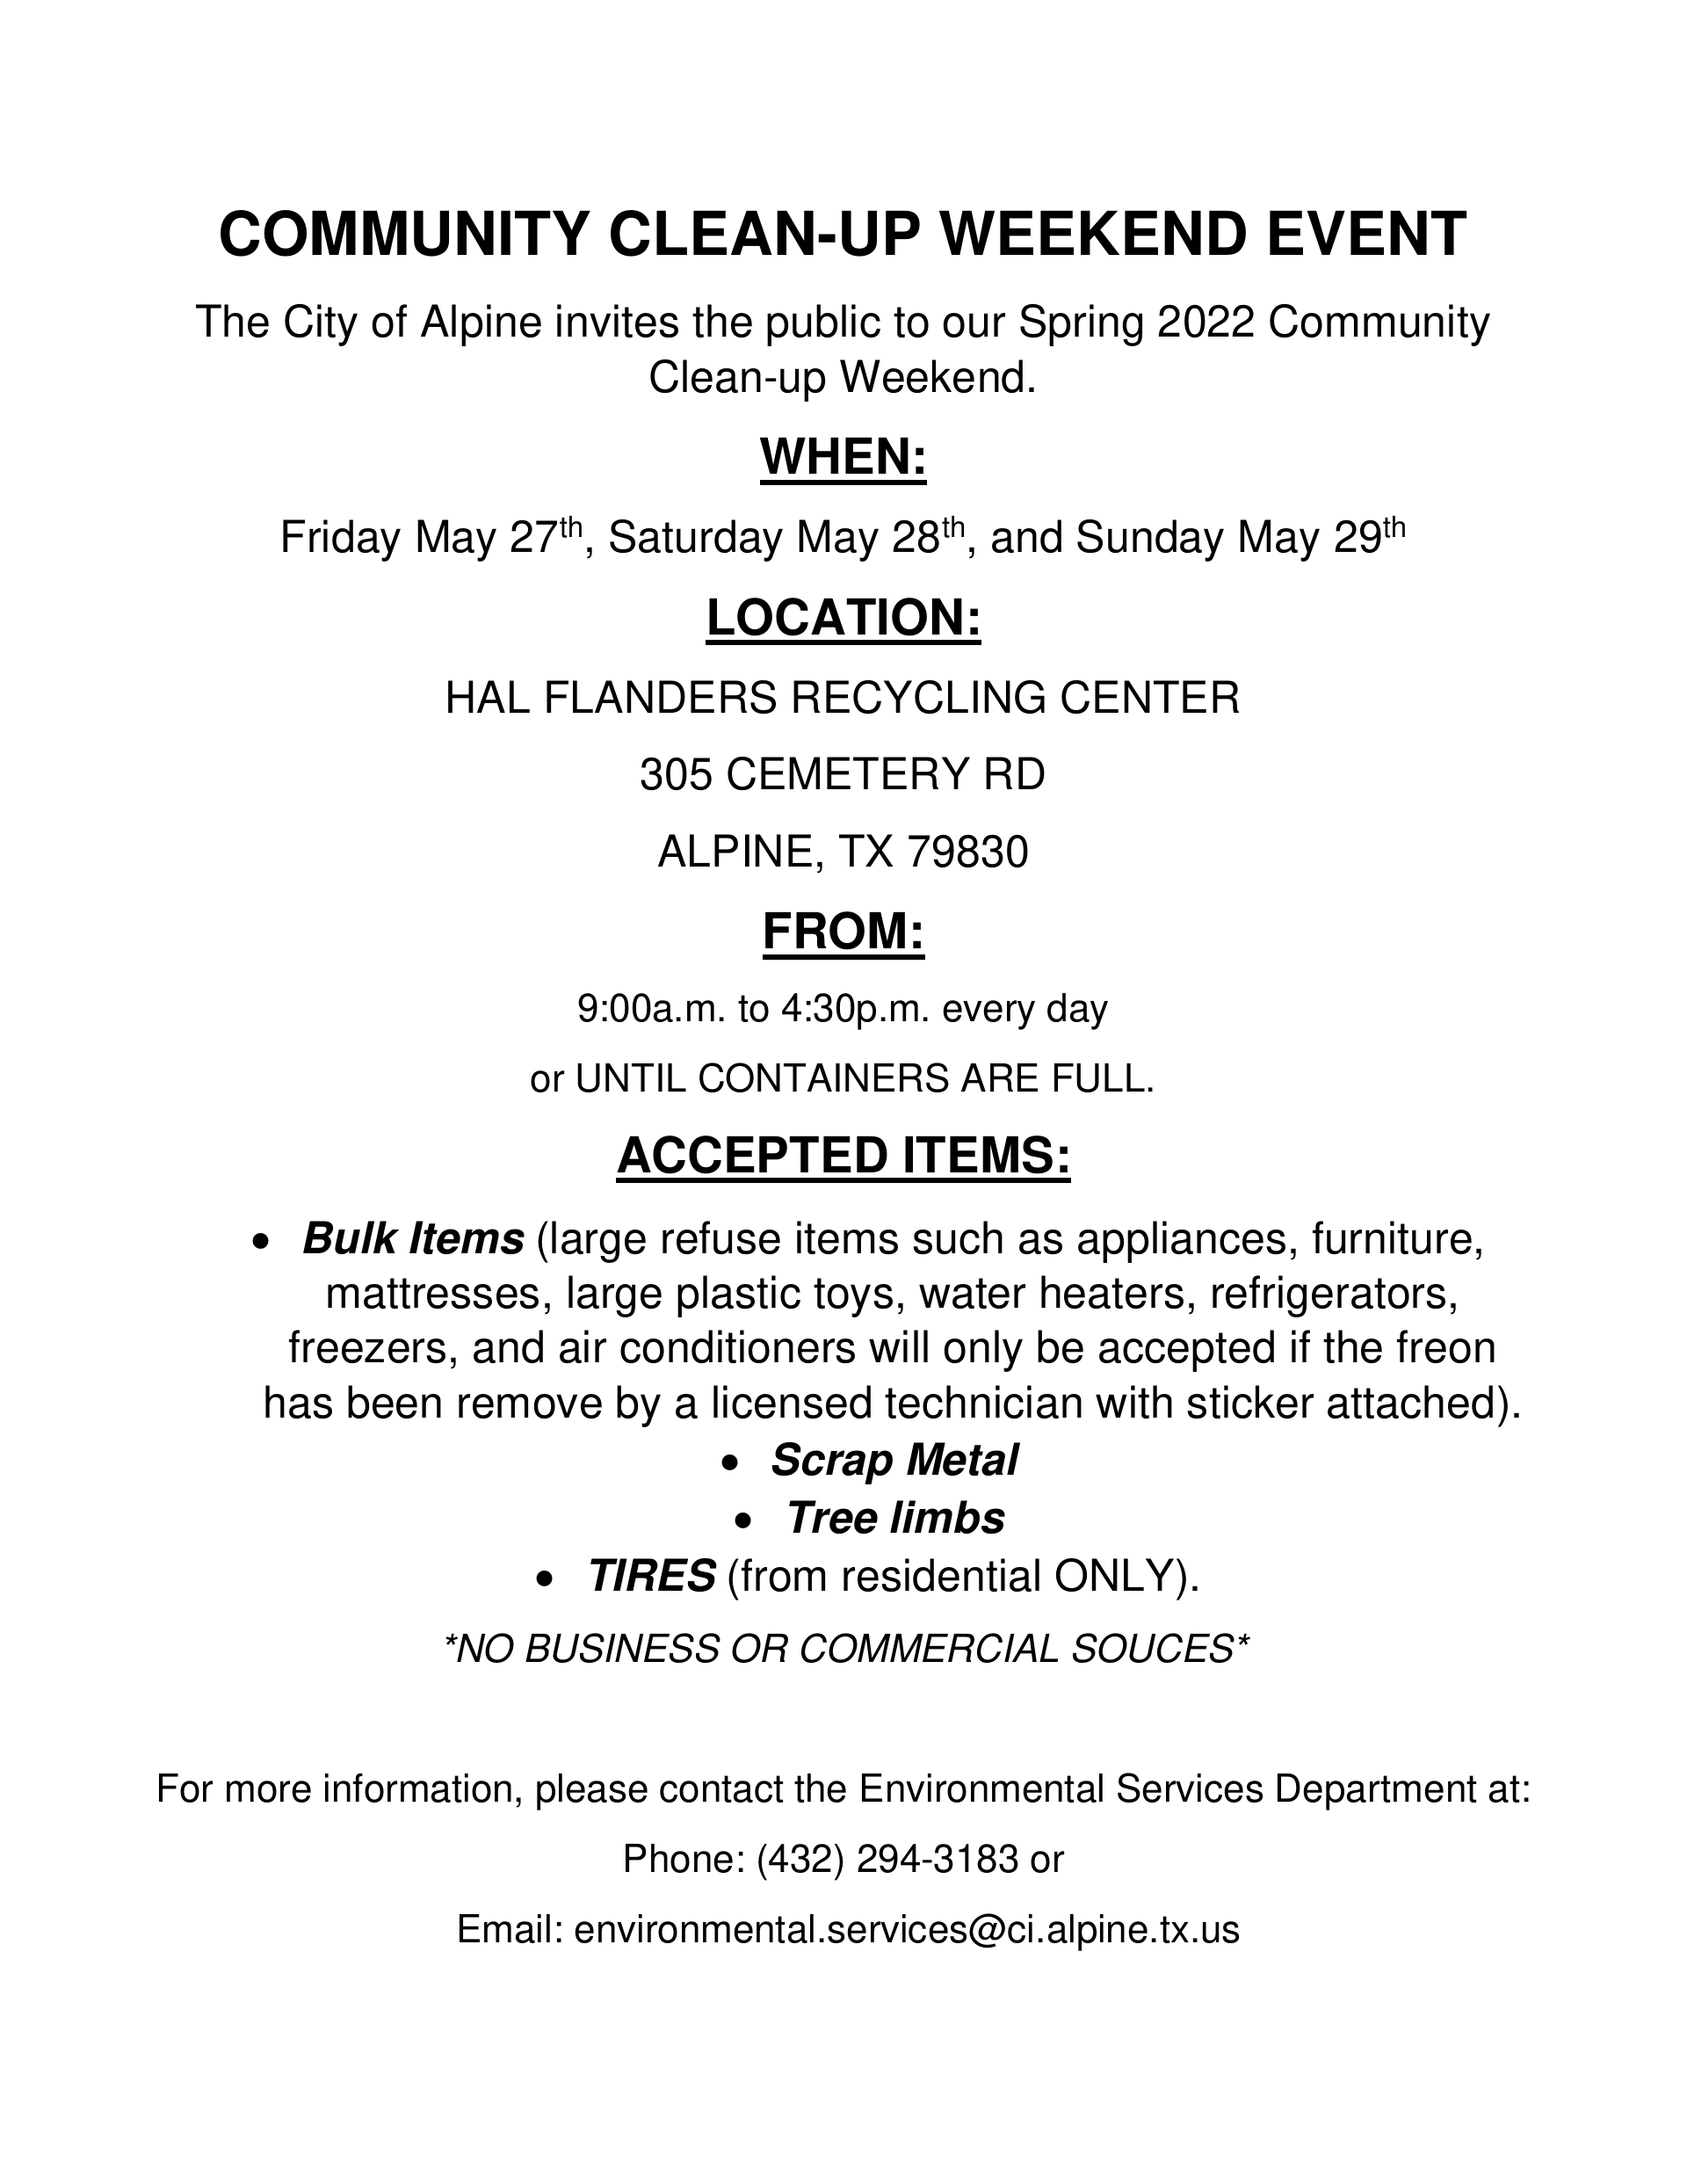 5-29-22 COMMUNITYCLEANUP_INFO